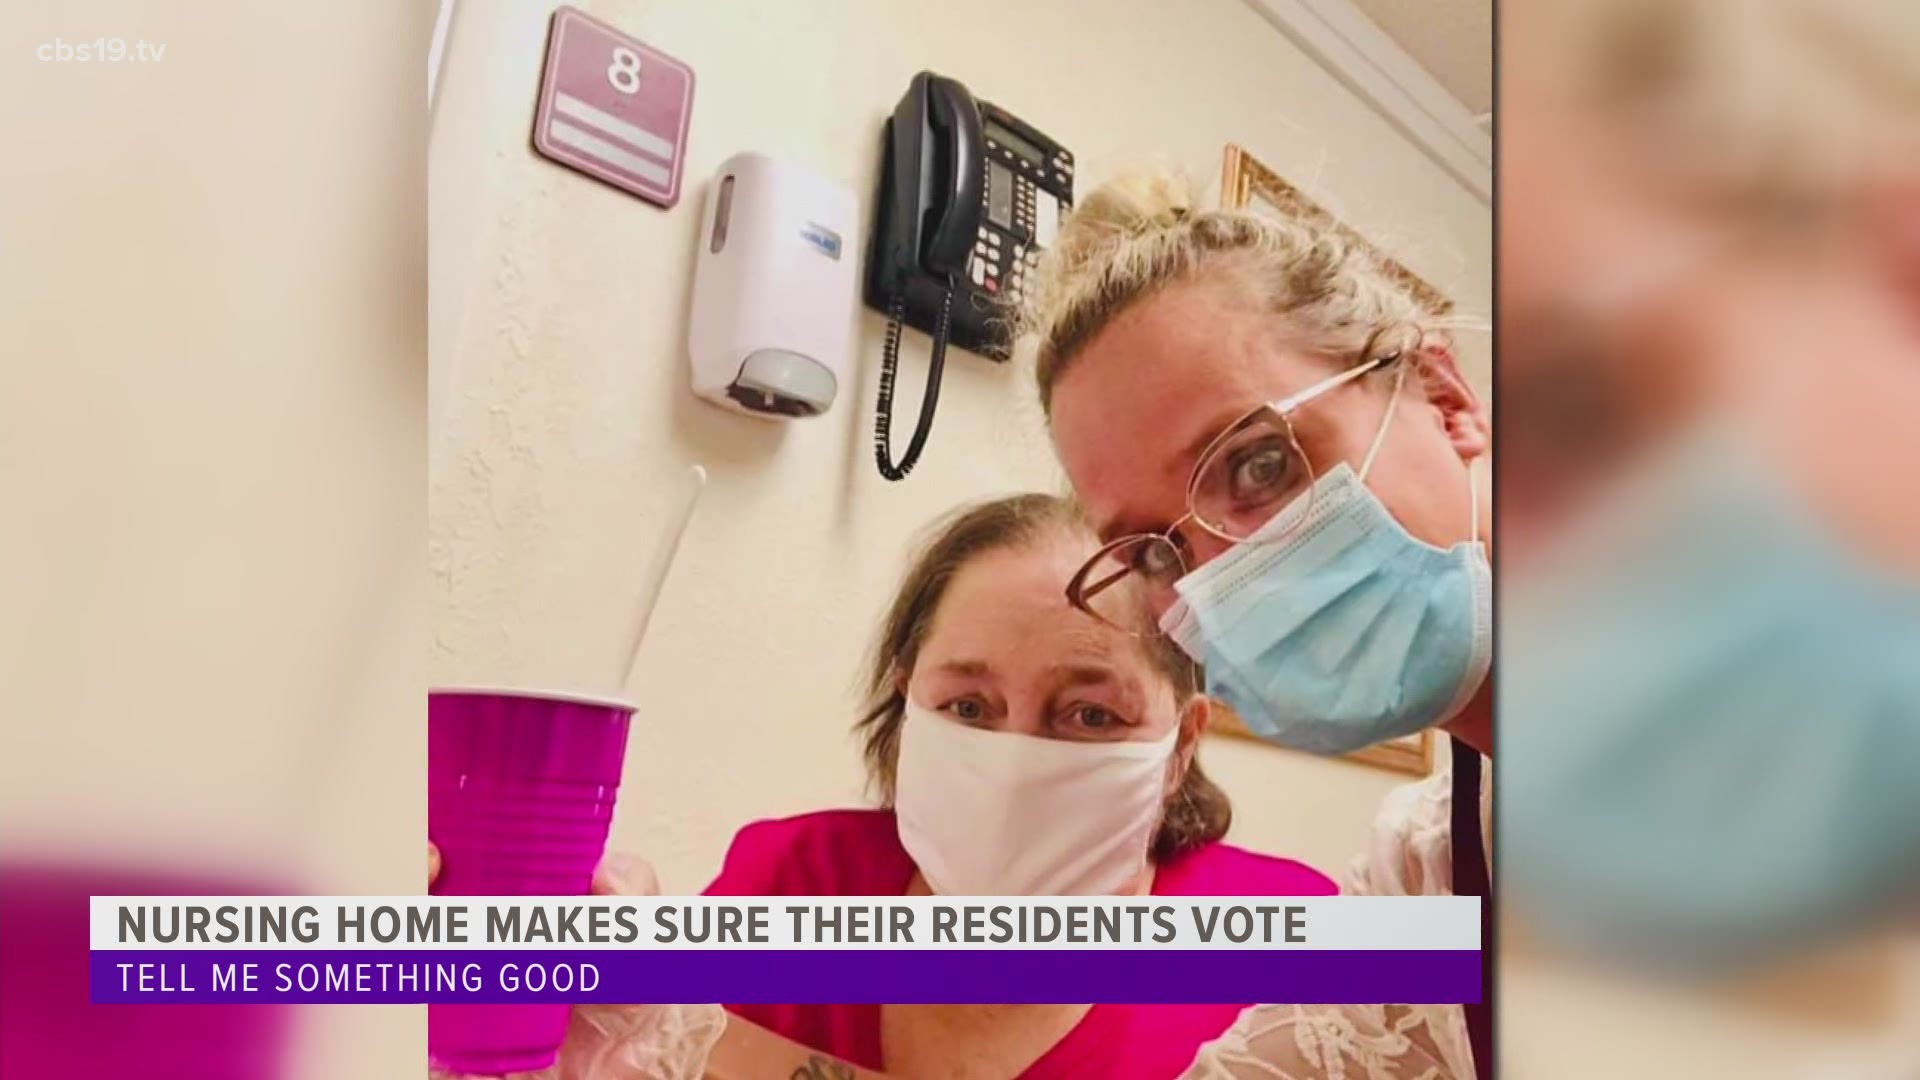 Activity Director at Mineola Heights Healthcare Centre, Alicia Kull, made sure her residents still had their voices heard, from the safety of their home.